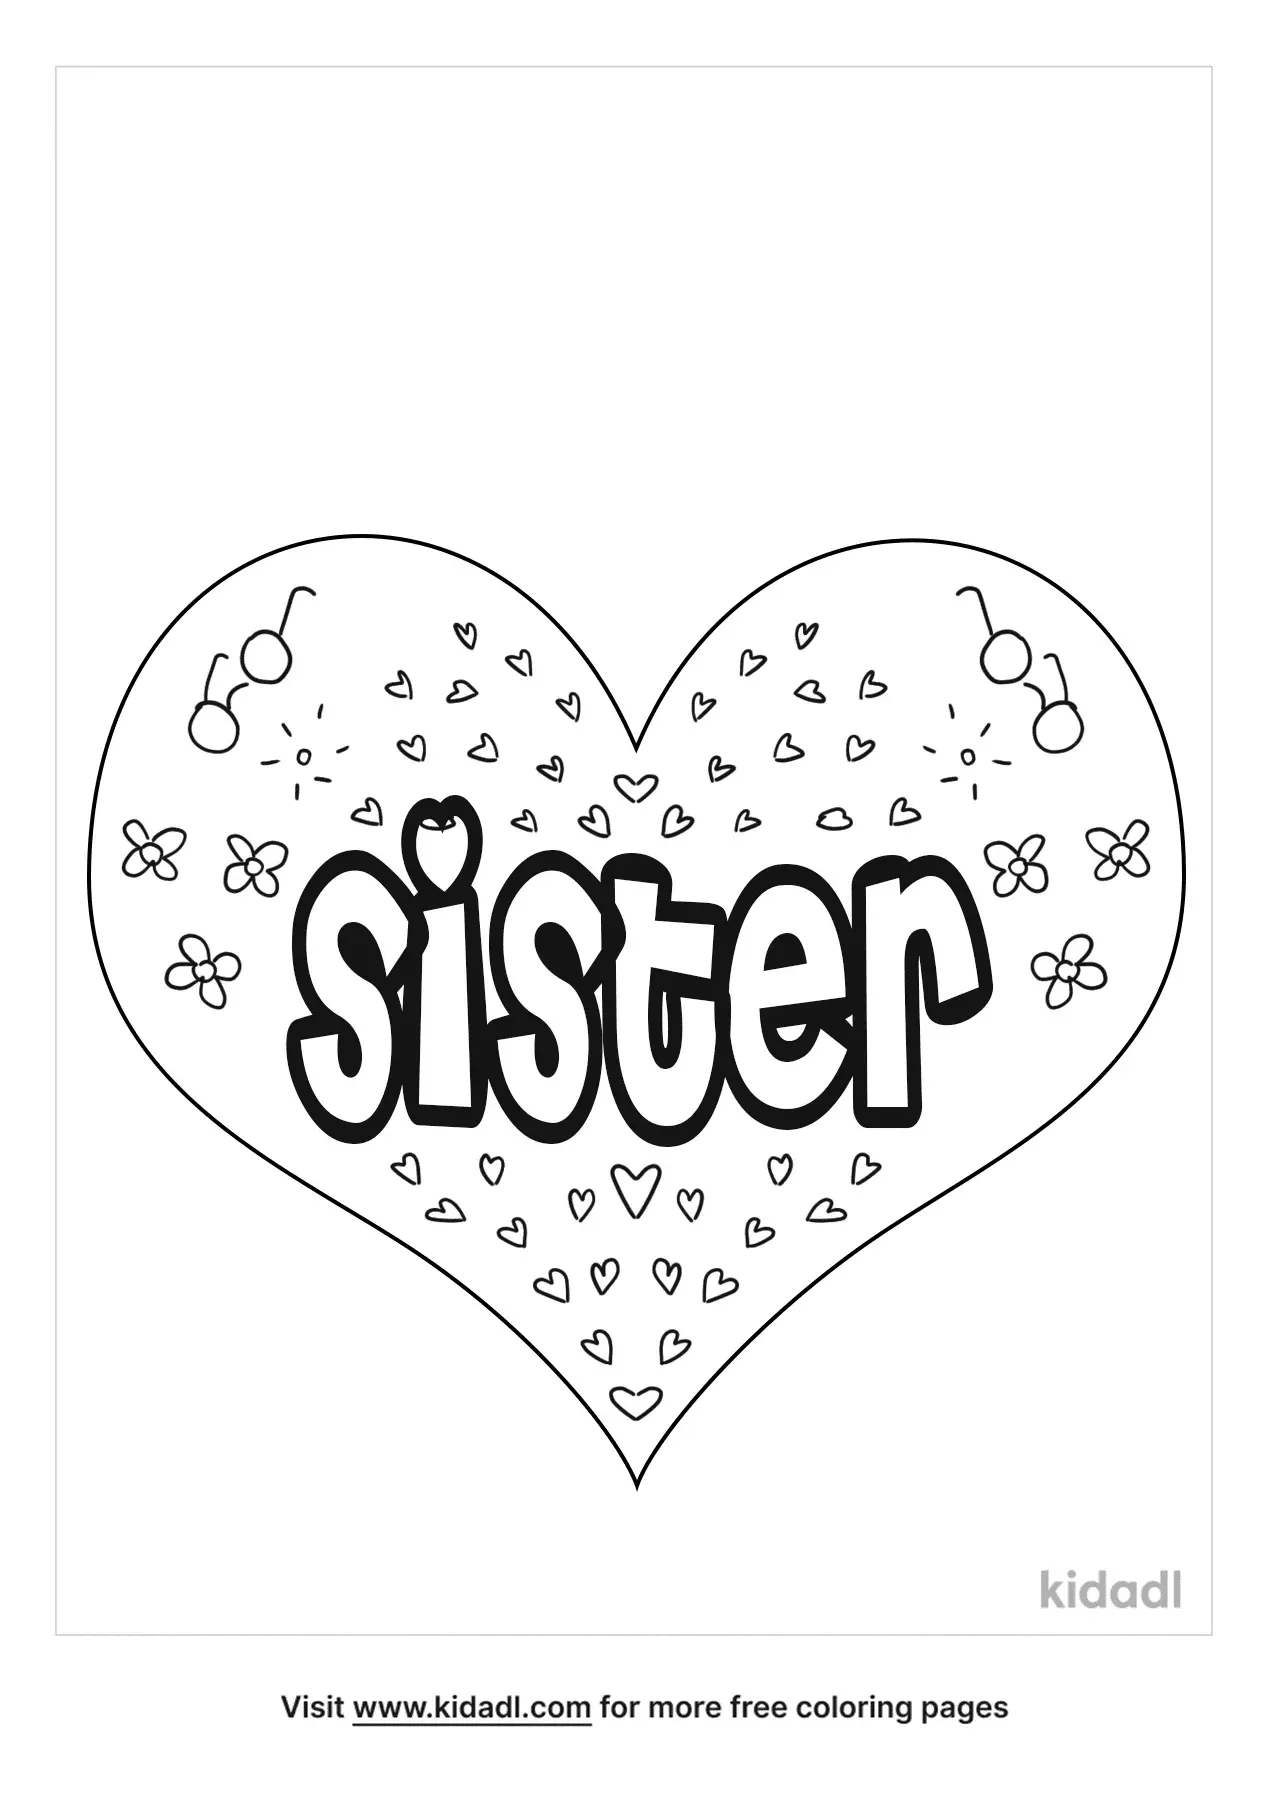 the-word-sister-coloring-pages